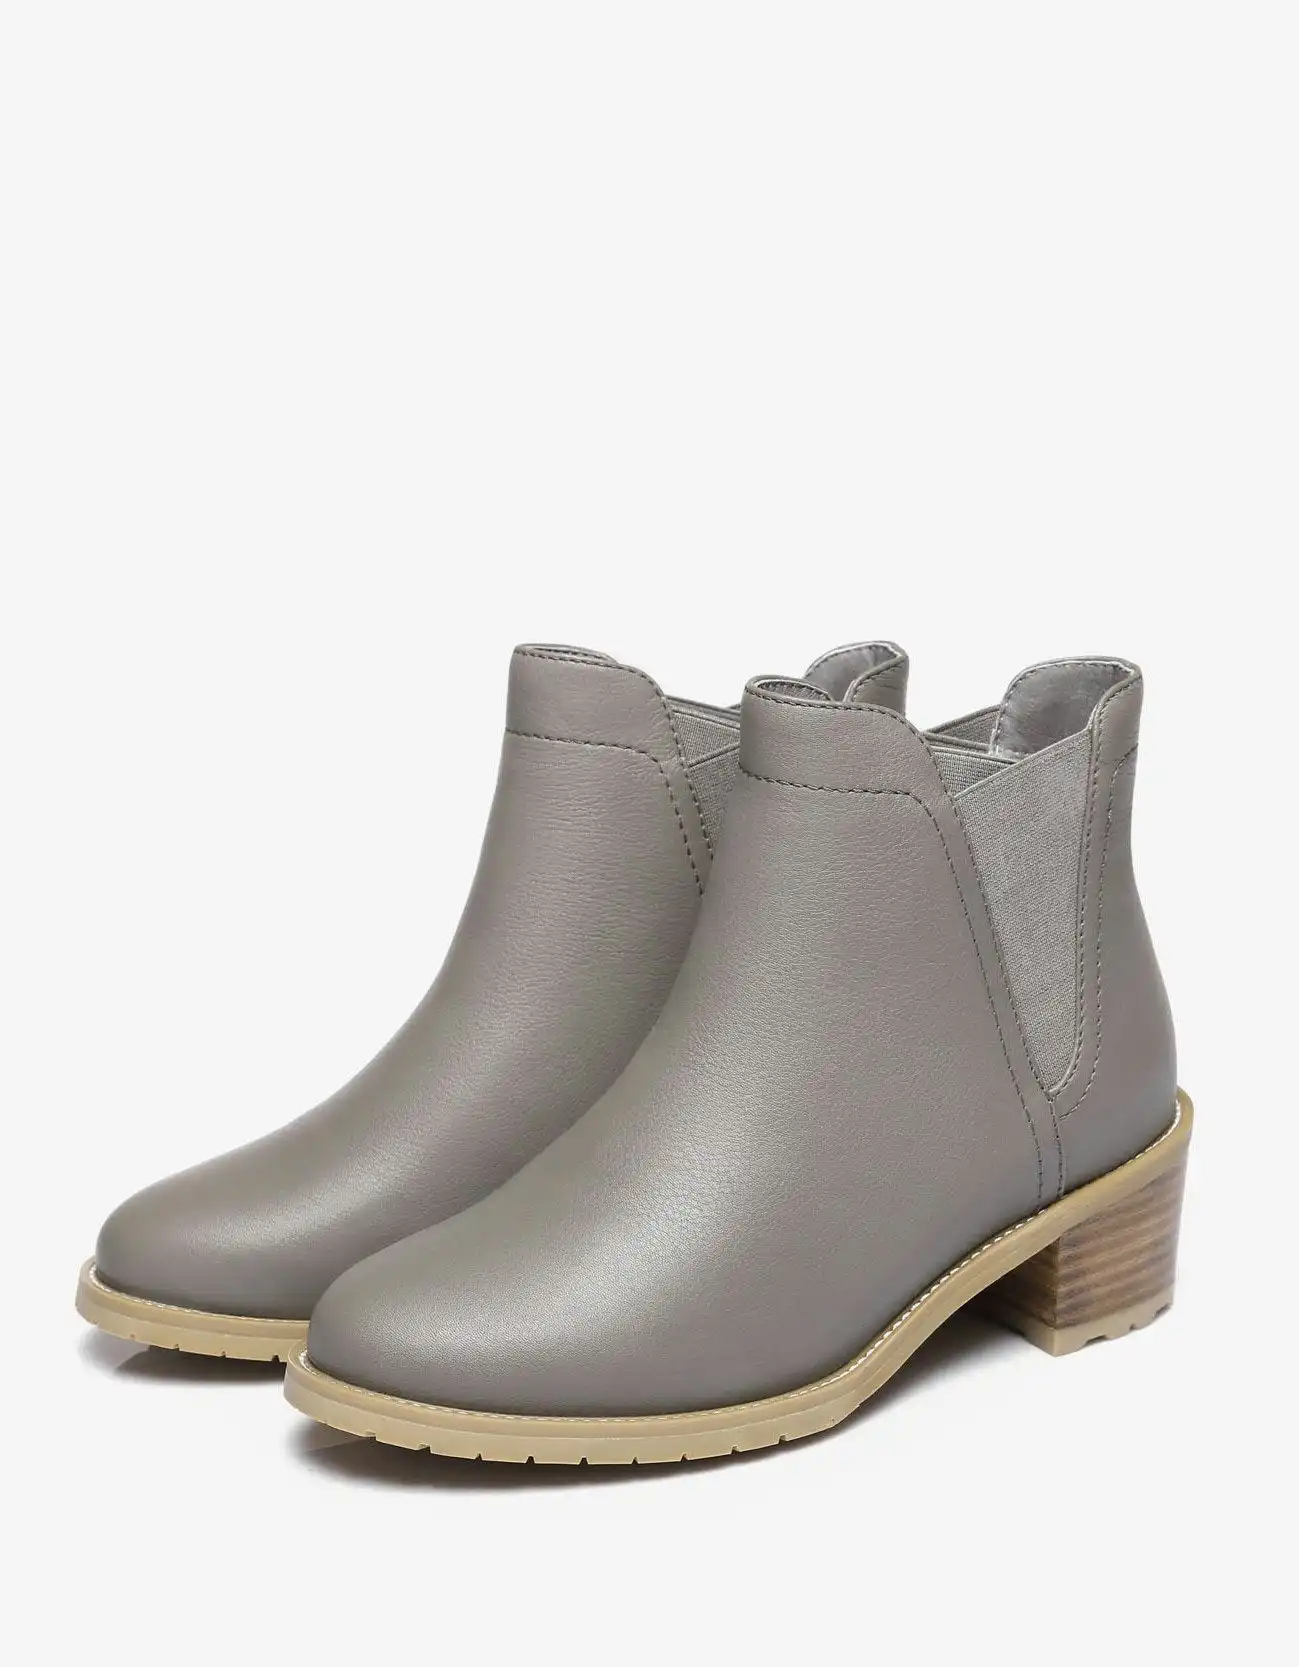 Urban CHELSEA UGG BOOTS Sheep Suede Shoes Women